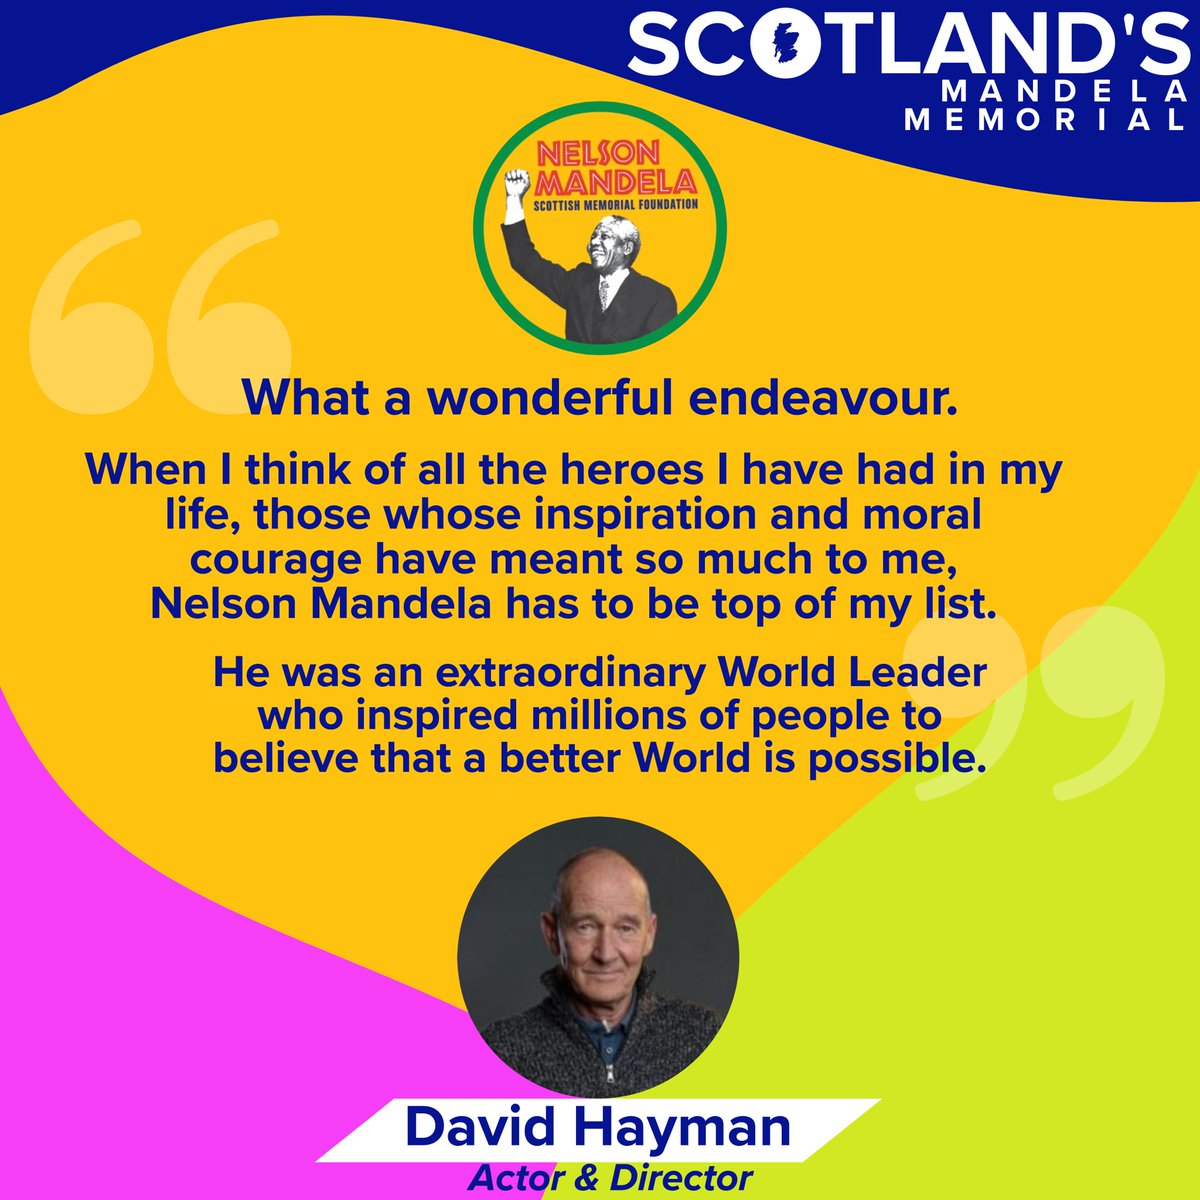 Can you help to push us over the line? What our supporters say...We are grateful to David Hayman who shared these words of support. Scotland's Mandela Statue - Make It Happen! Please donate at bit.ly/MandelaCrowd